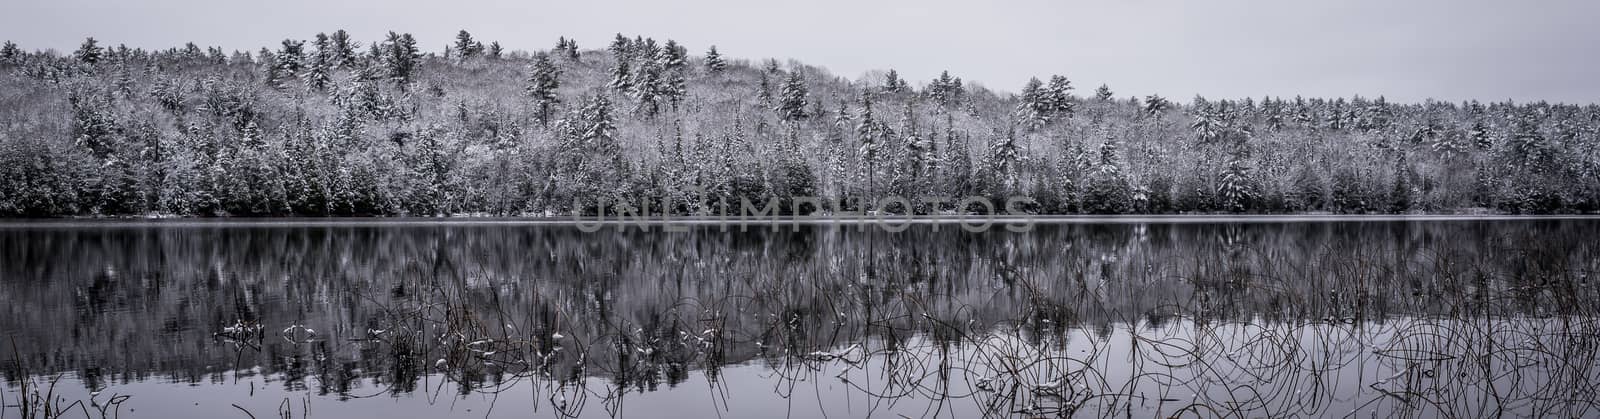 Panoramic view, winter forest reflections.  Mirage on a yet unfrozen lake. by valleyboi63